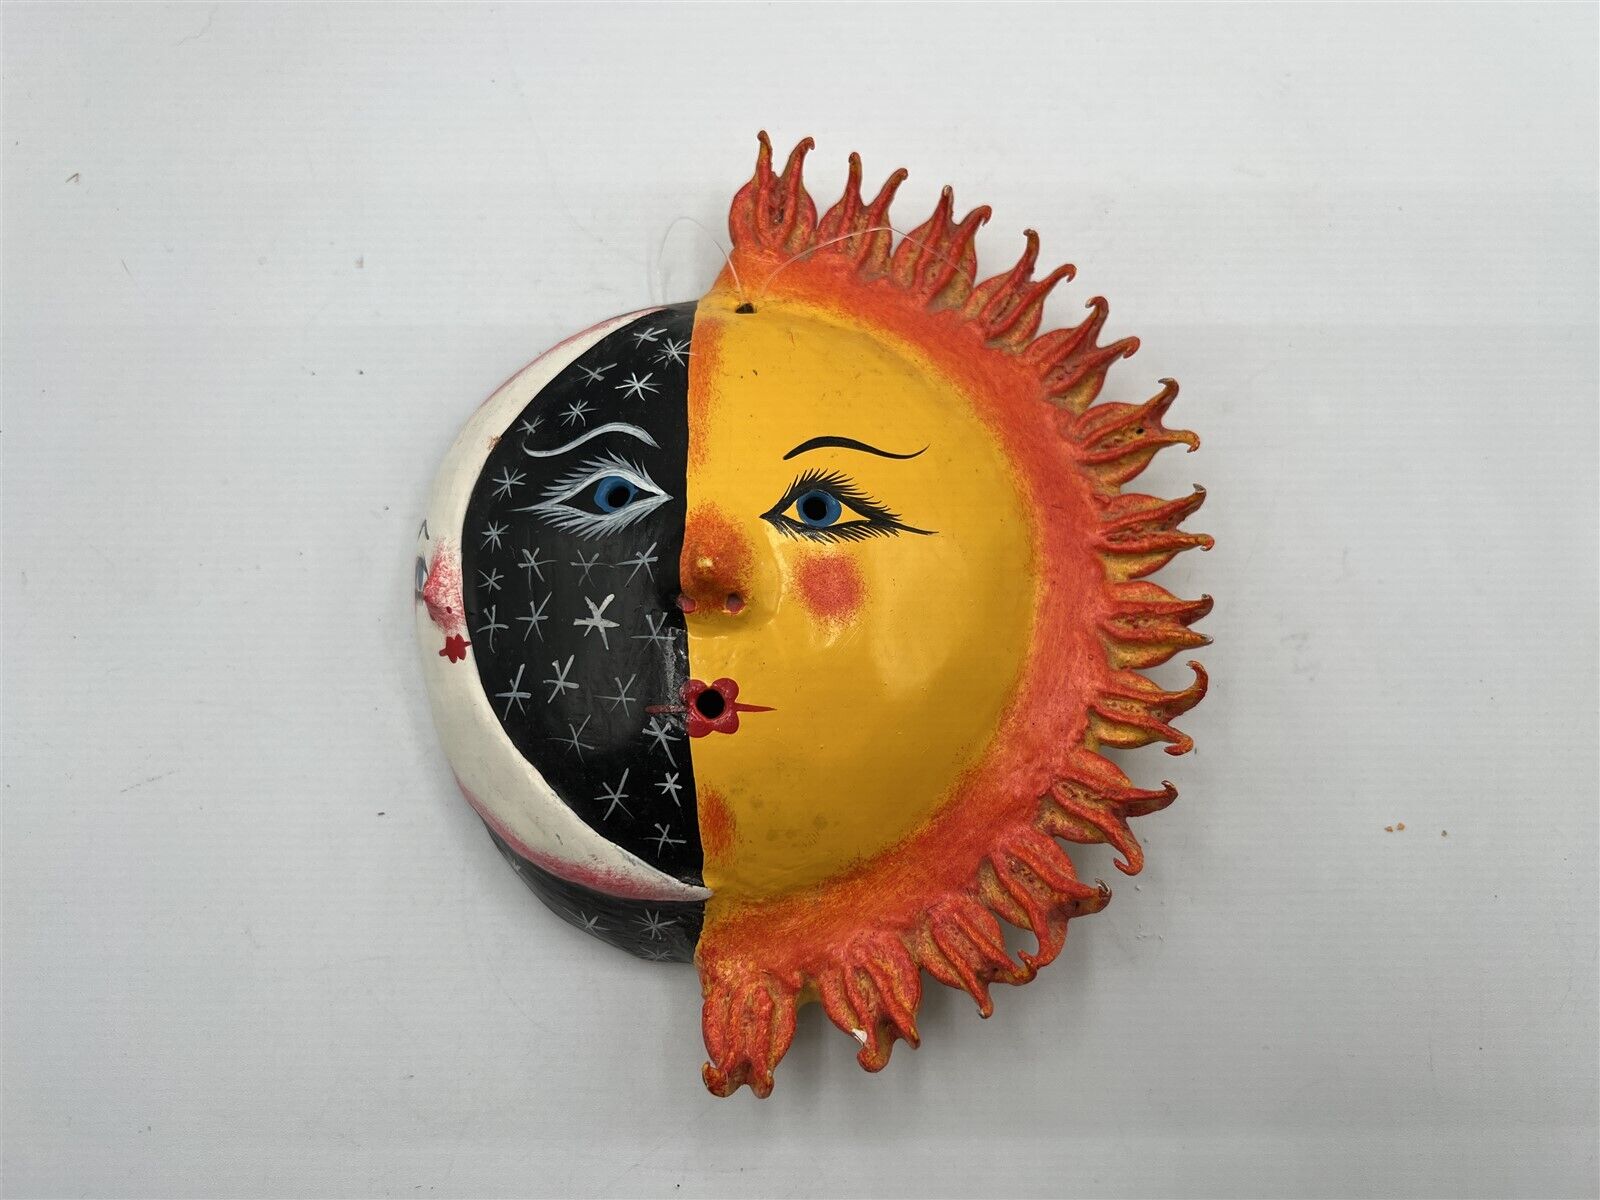 VINTAGE MEXICAN FOLK ART HALF MOON HAVE SUN W/ FACE HAND PAINTED COCONUT SHELL